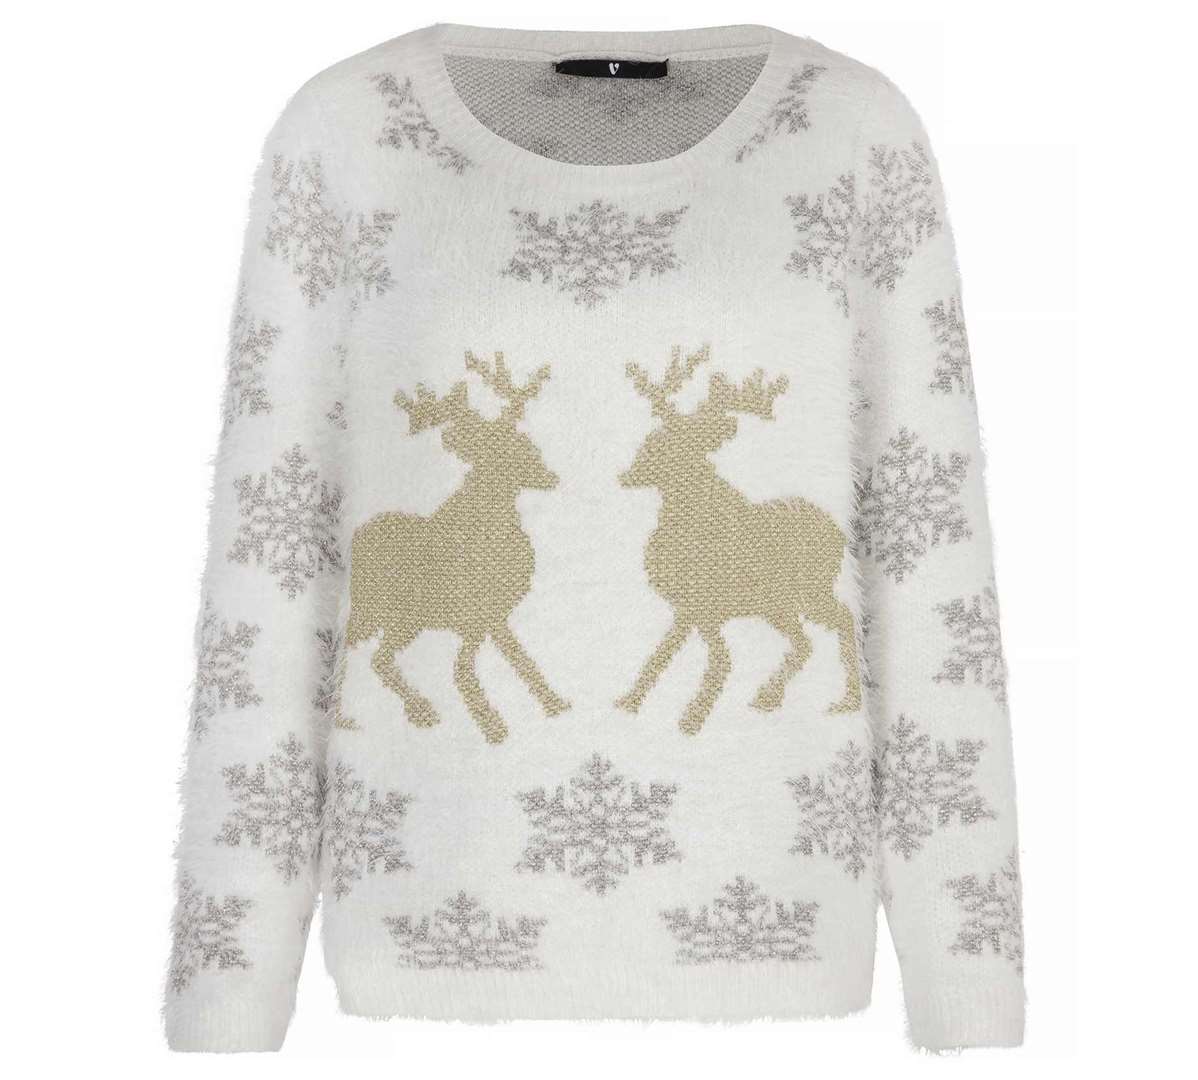 Sparkling Reindeer Fluffy Jumper, £30, available from Very.co.uk